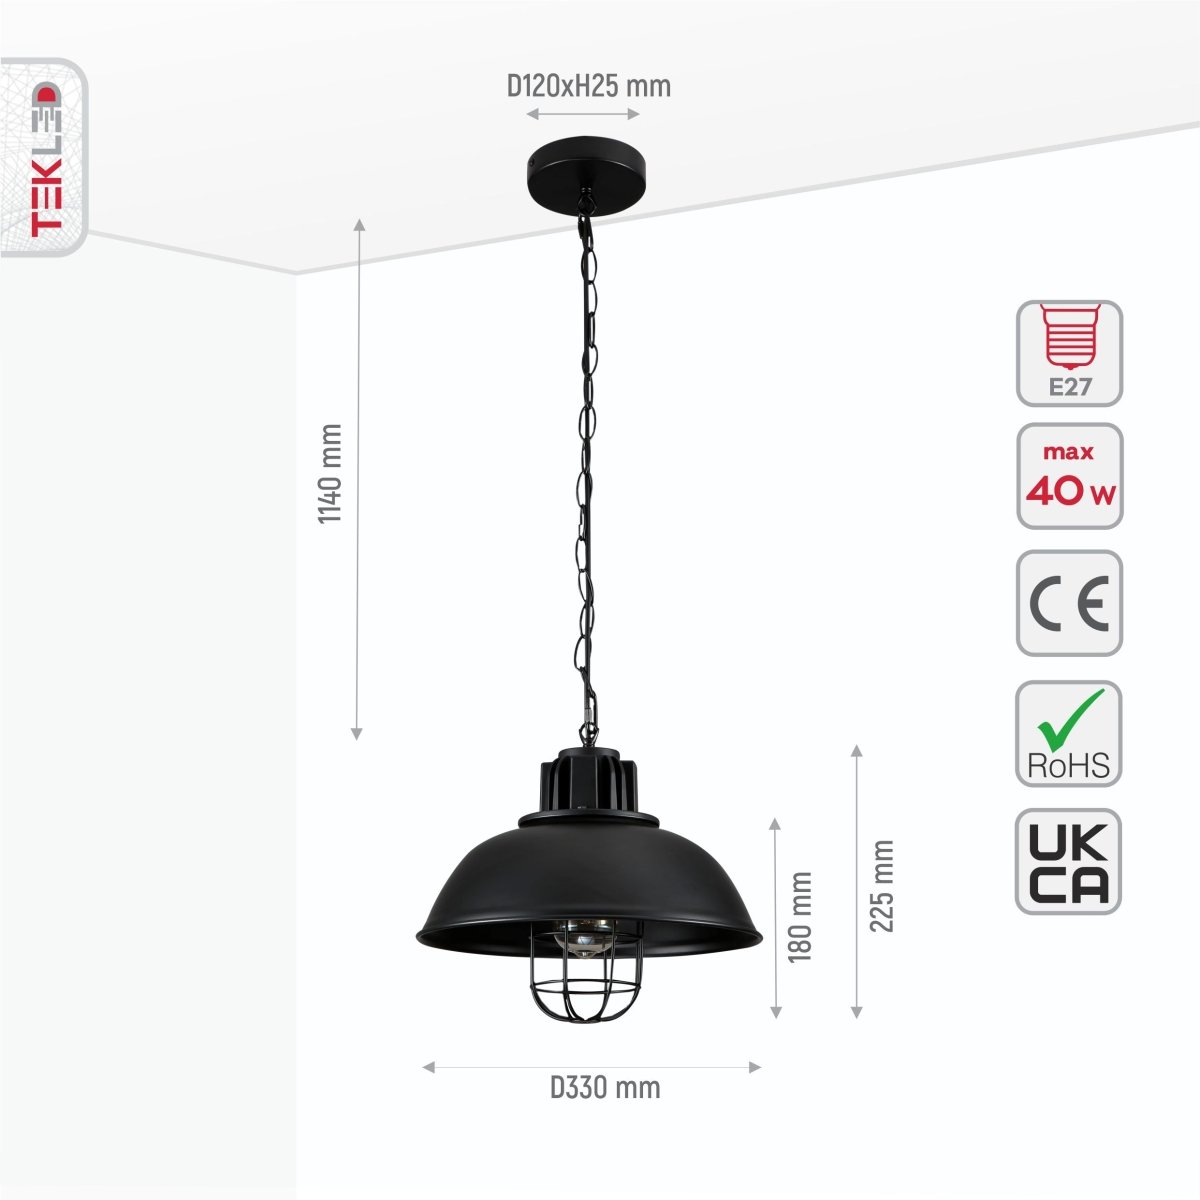 Size and specs of Black Dome Caged Industrial Metal Ceiling Pendant Light with E27 Fitting | TEKLED 150-18352